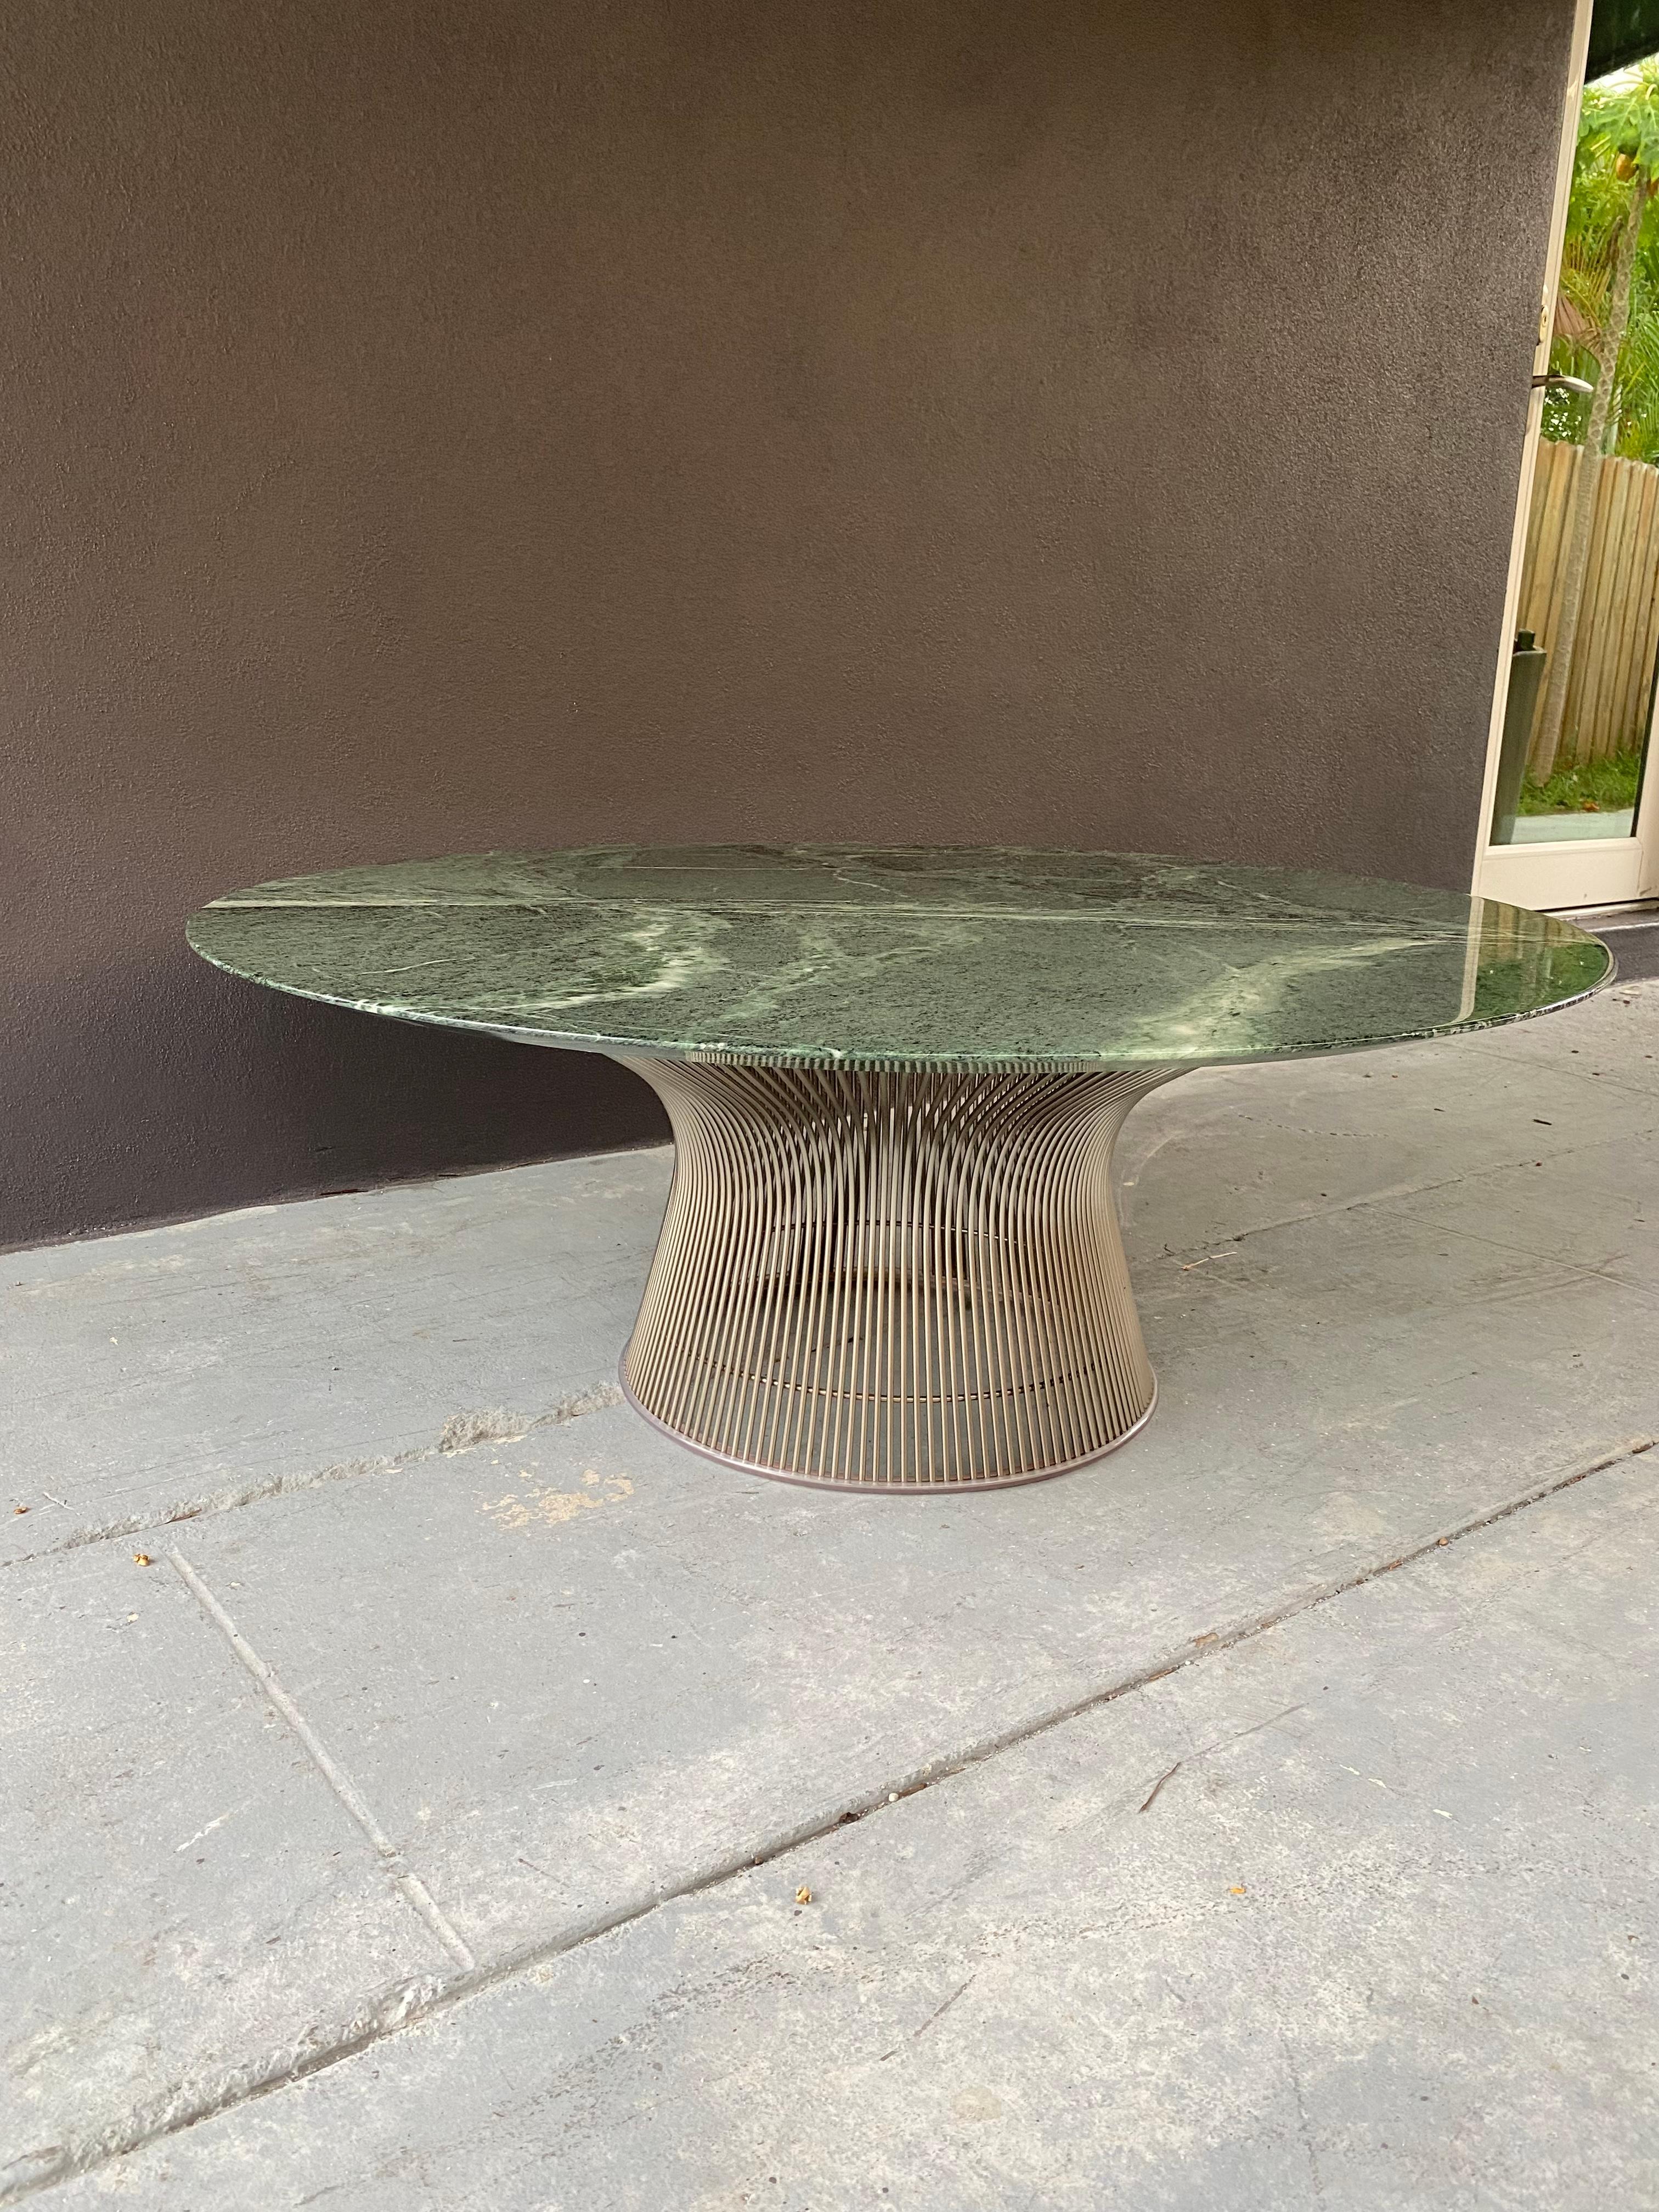 On offer on this occasion is one of the most stunning table you could hope to find. This is an ultra-rare opportunity to acquire what is, unequivocally, the best of the best, it being a most spectacular and beautifully presented green marble top